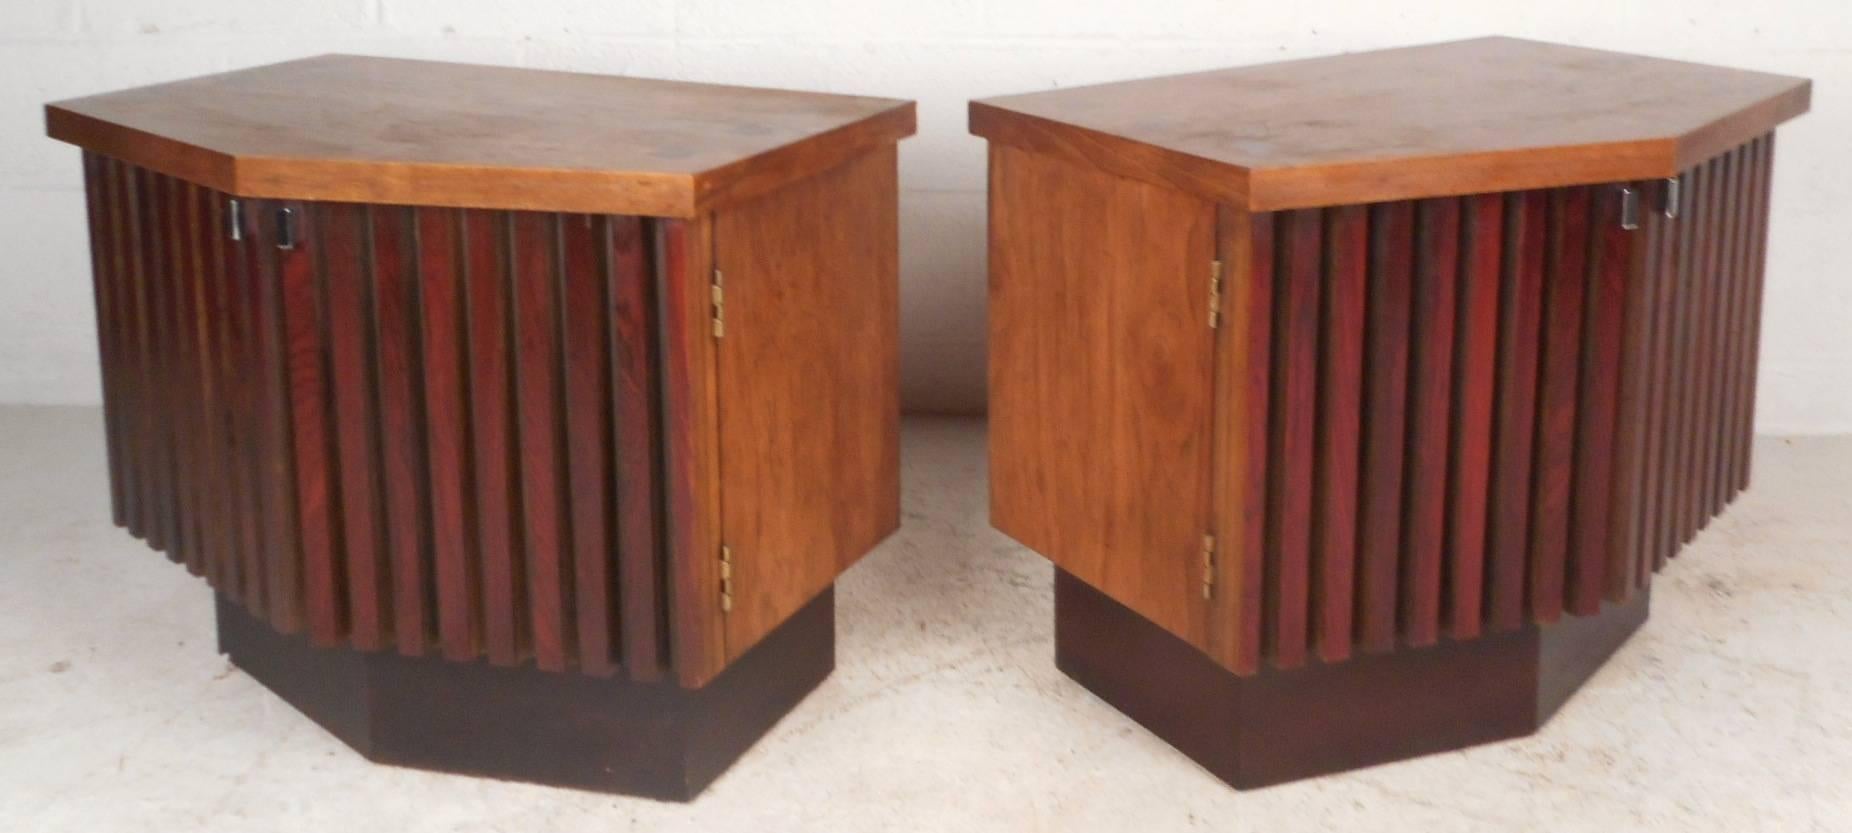 Late 20th Century Mid-Century Modern Rosewood and Walnut Nightstands